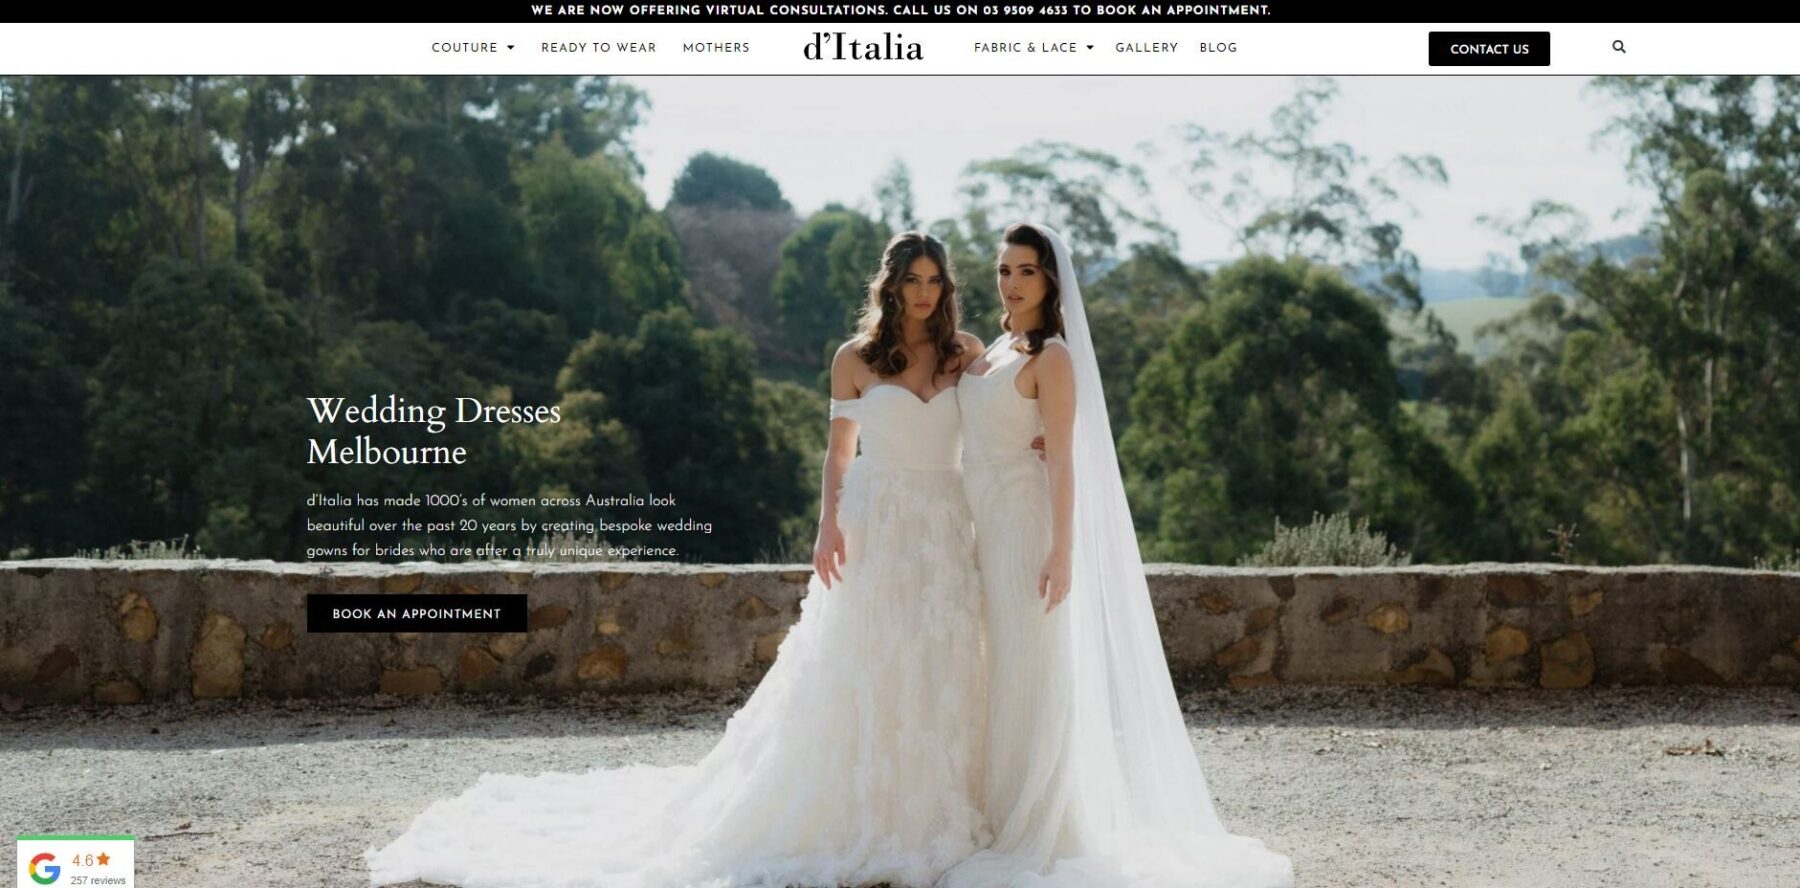 Top 30 Affordable Wedding Dress Shops in Melbourne, Victoria  by Wild Romantic Photography Melbourne